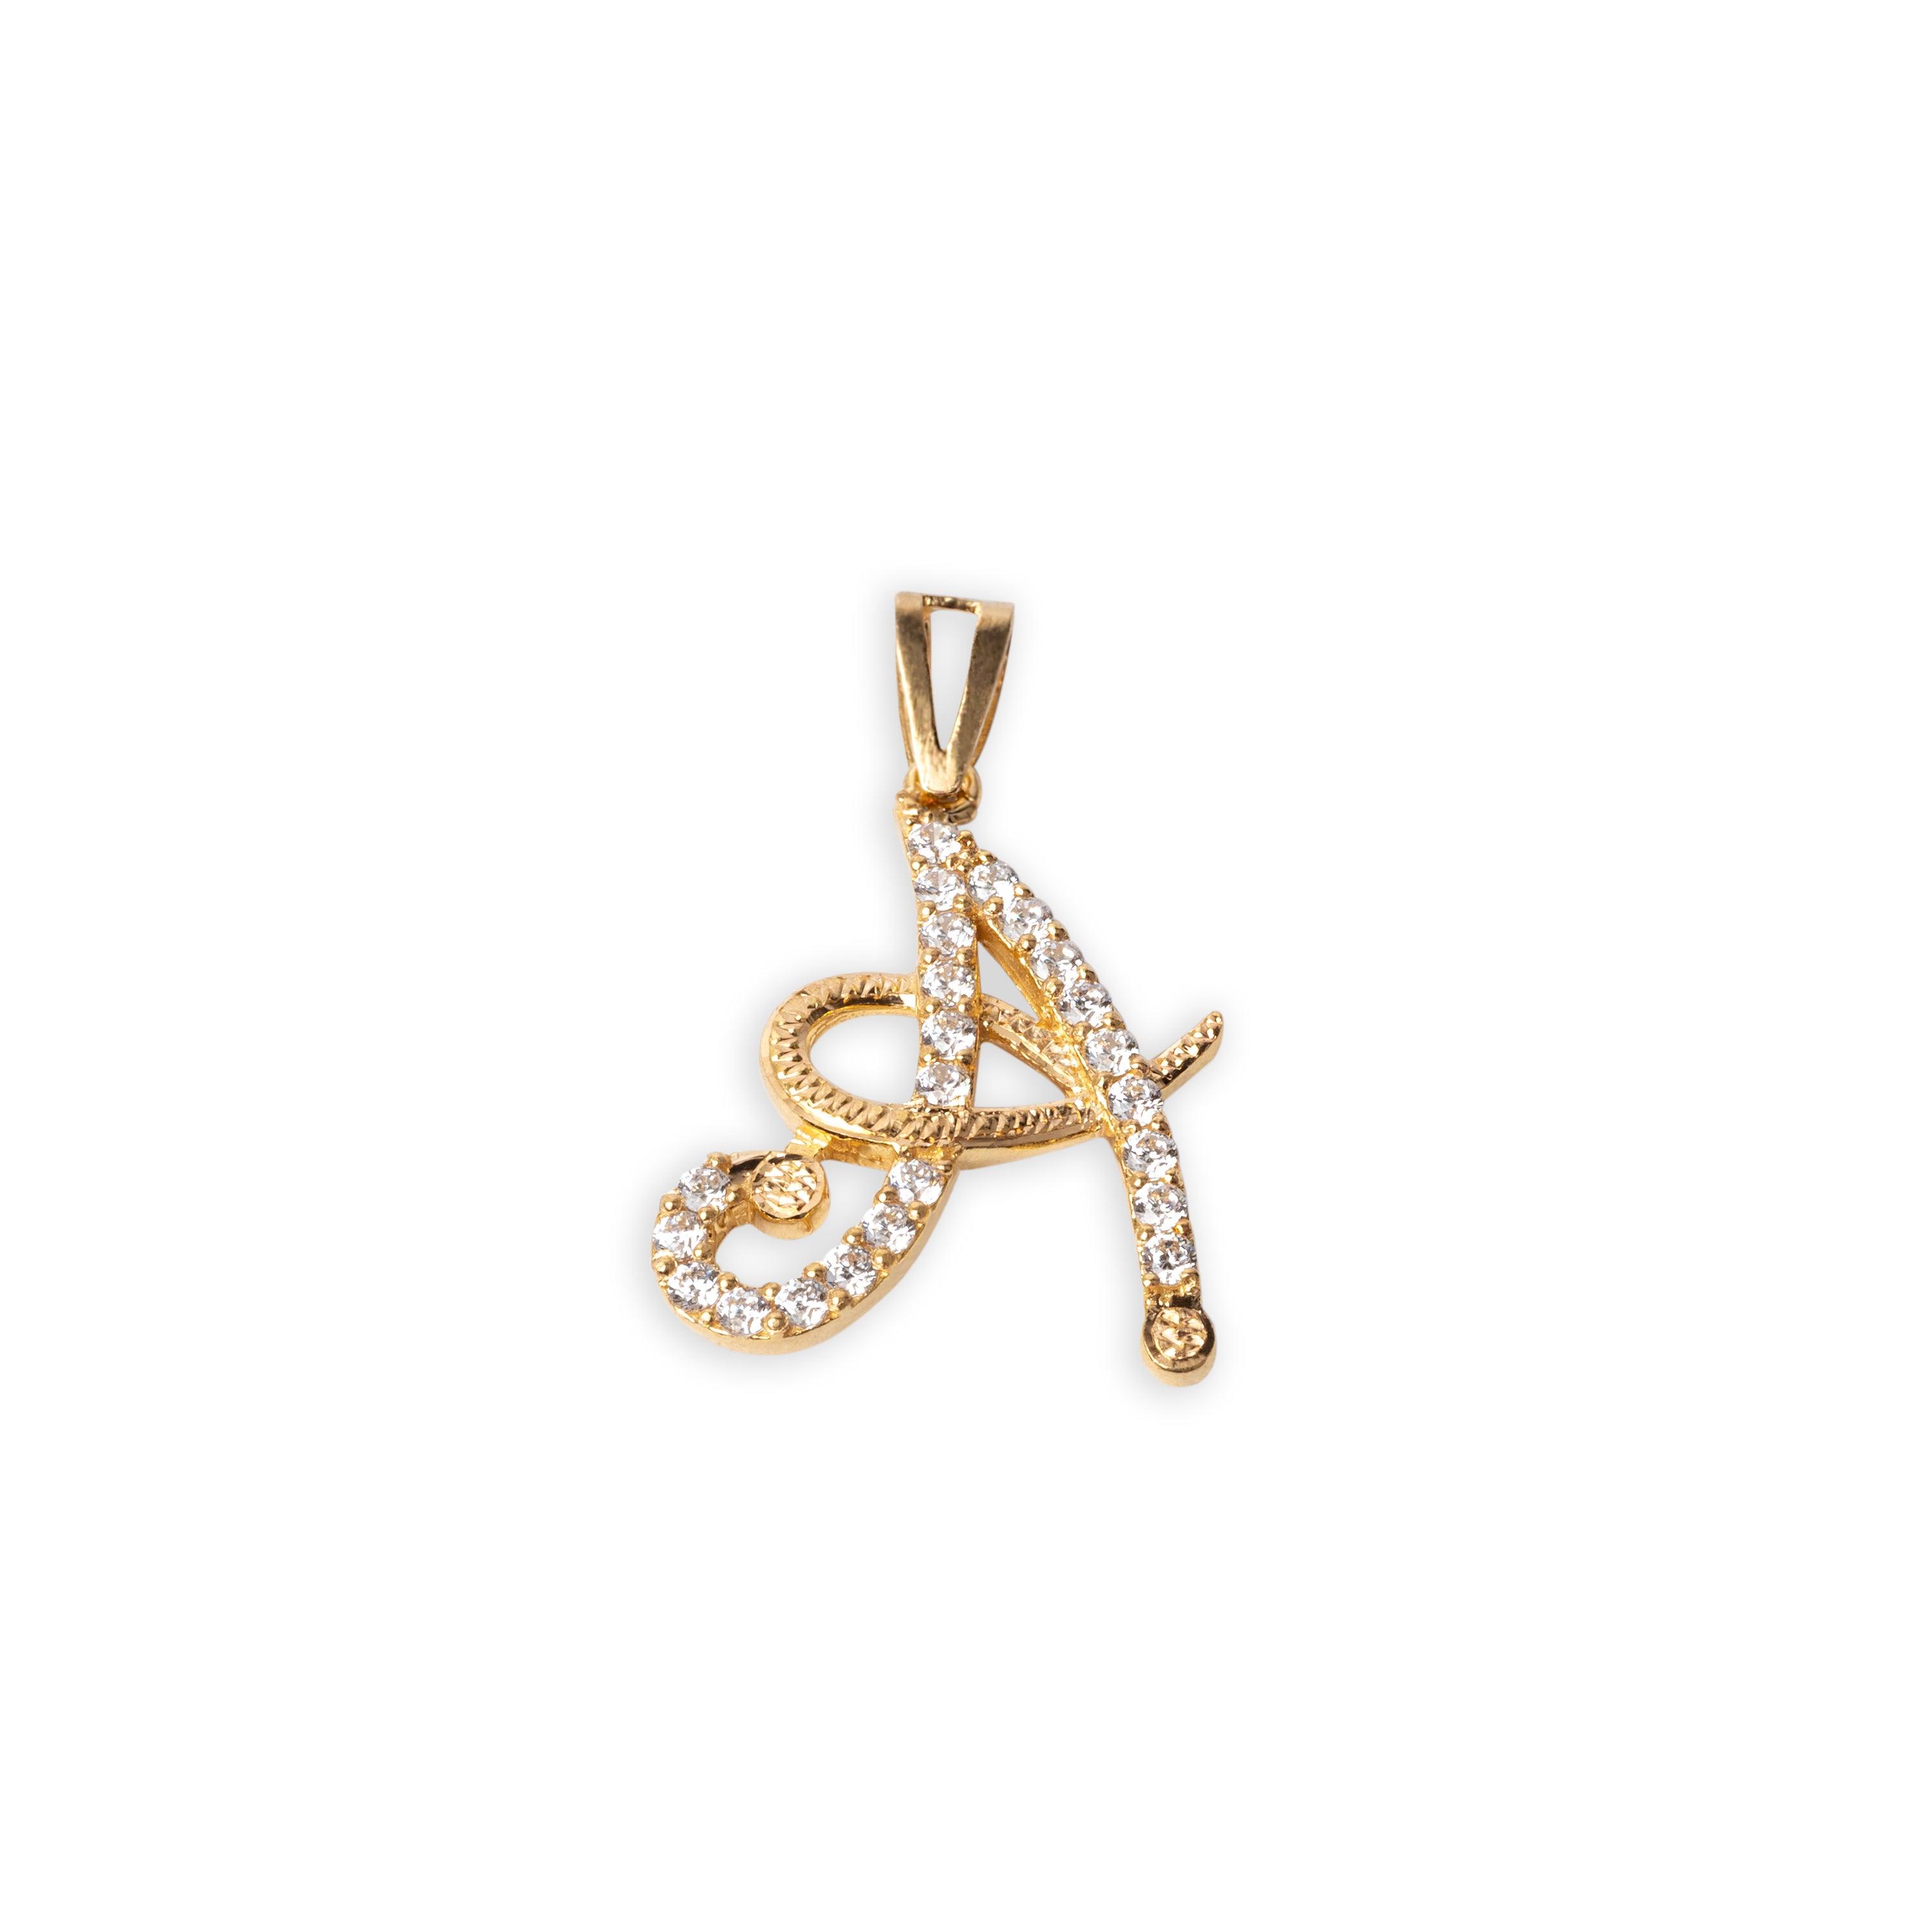 'A' 22ct Gold Initial Pendant with Cubic Zirconia Stones P-7039-A - Minar Jewellers